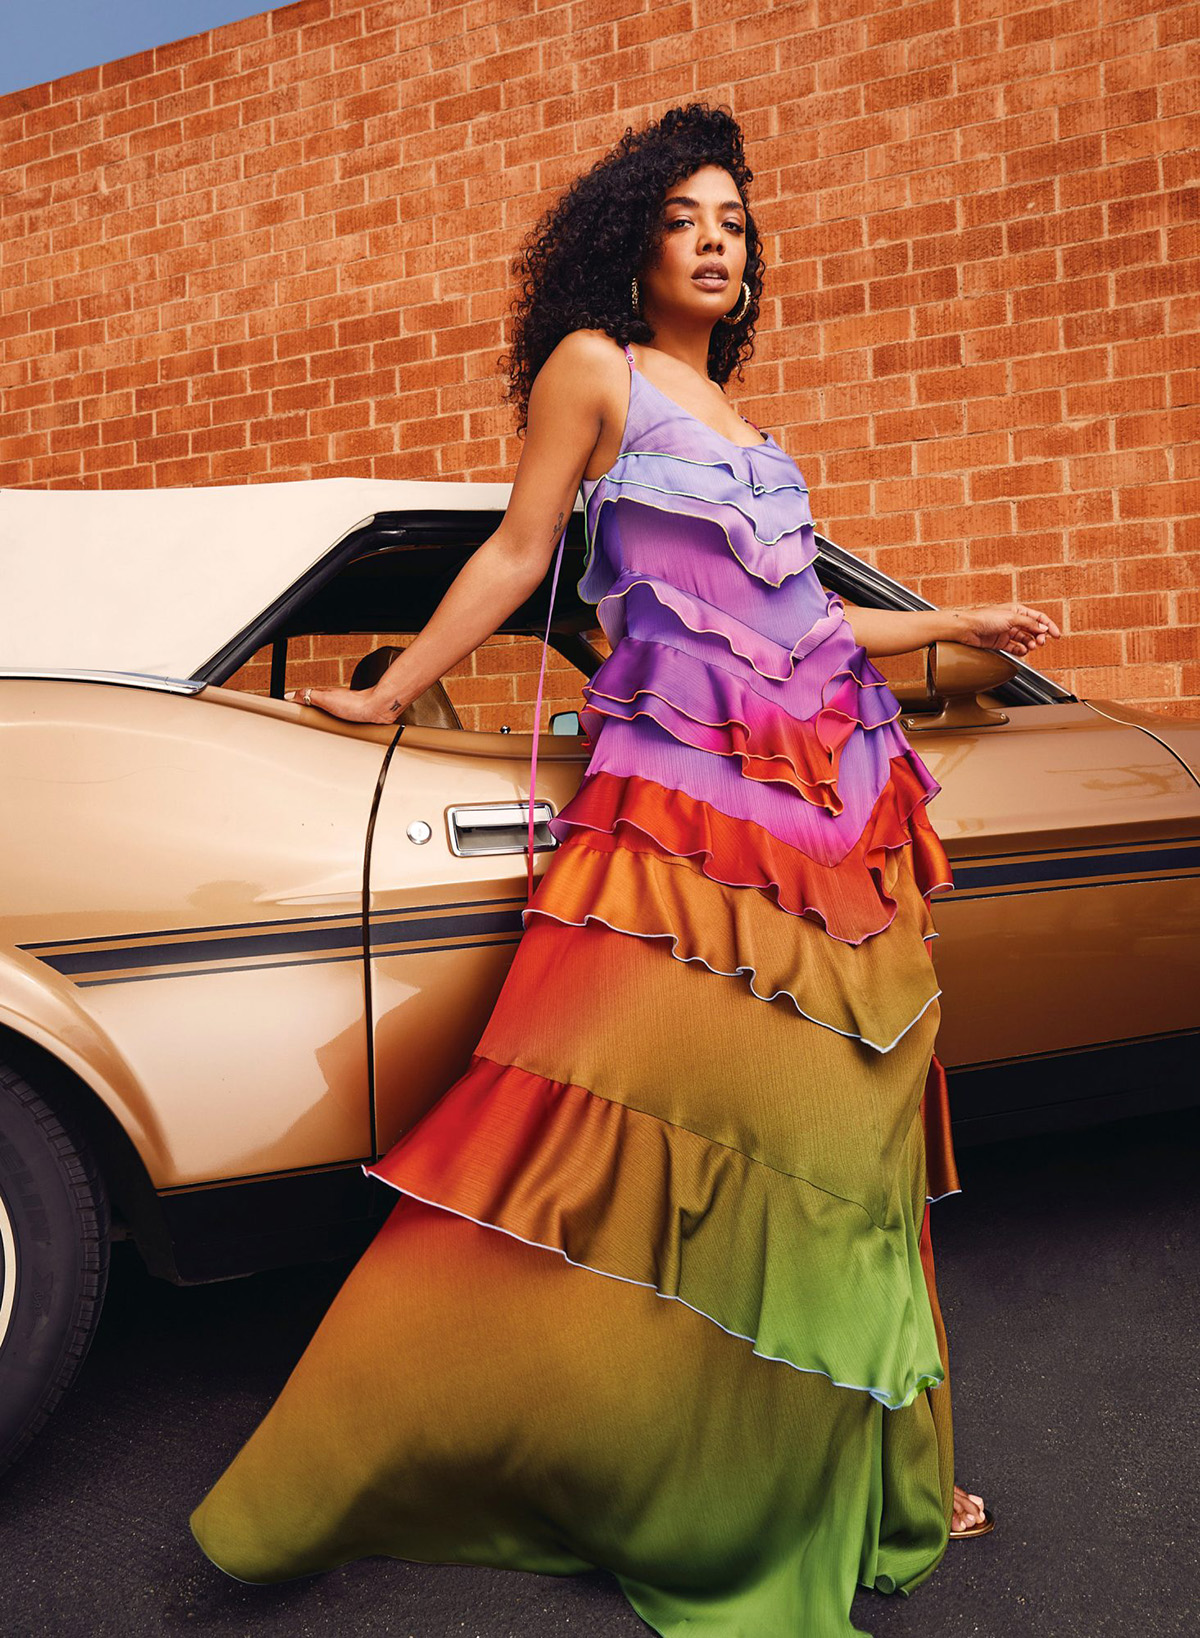 Tessa Thompson covers InStyle US December 2021/January 2022 Digital Edition by AB+DM